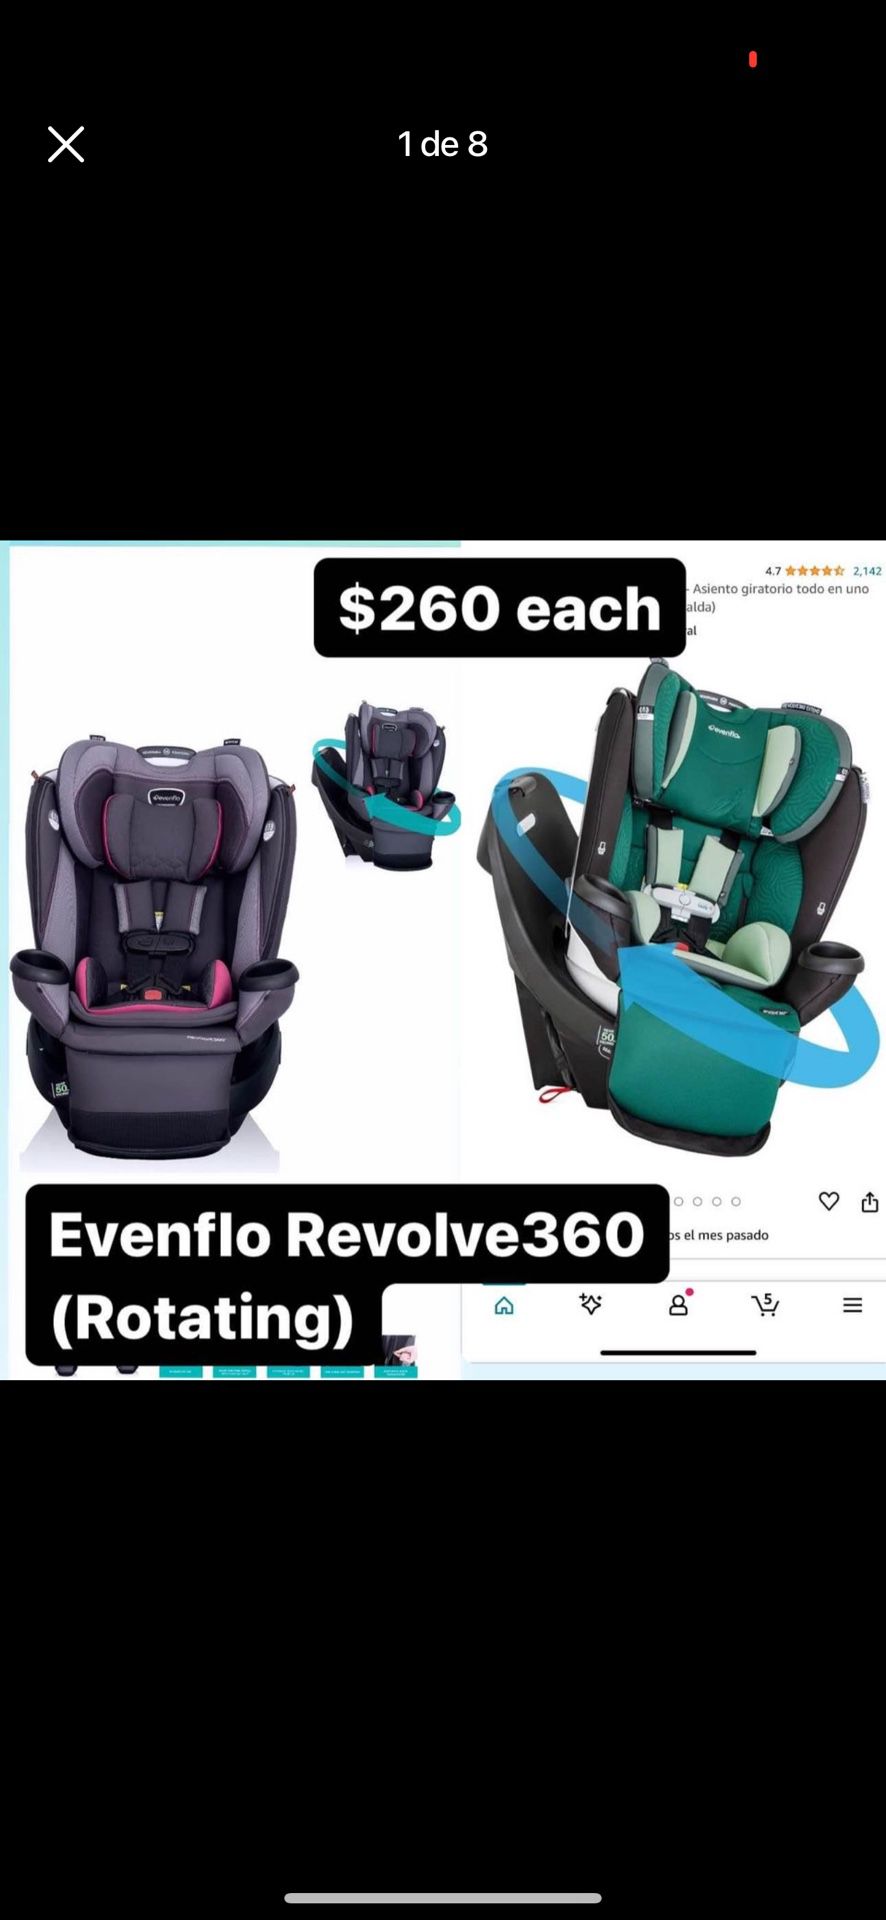 Evenflo Gold Revolve360 Extend All-In-One Rotational Car Seat - (Green and Gray)